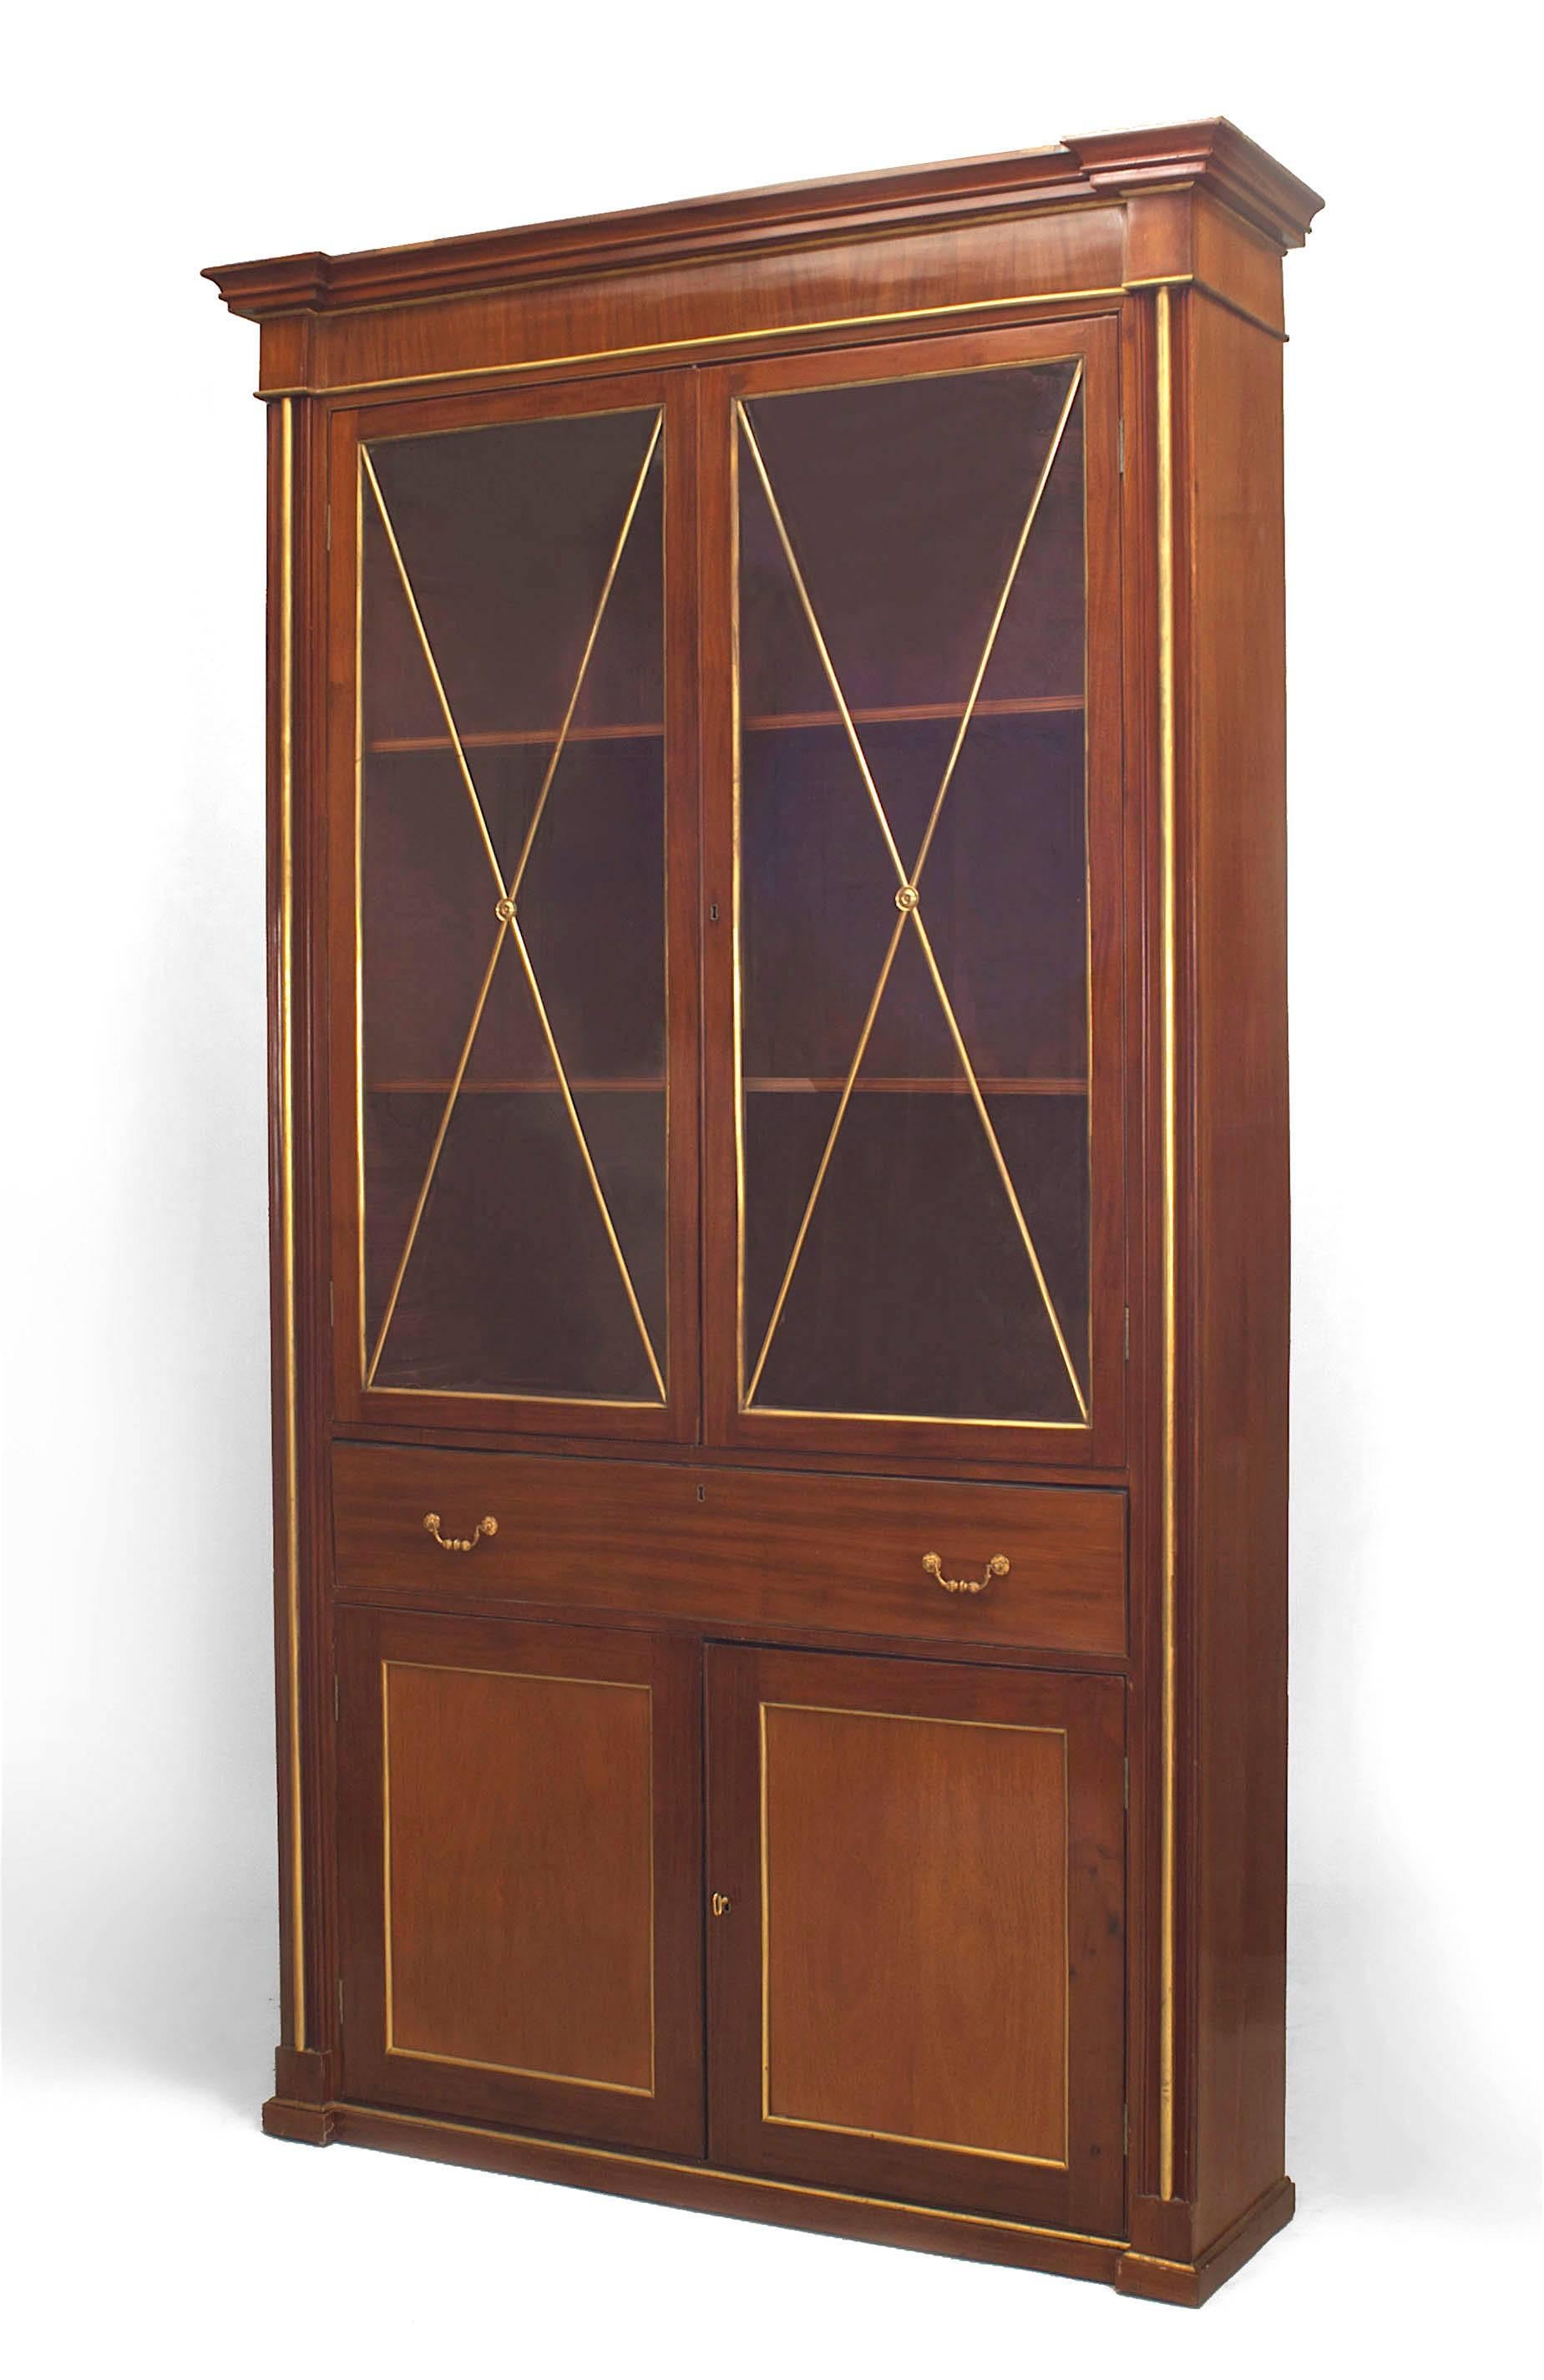 Pair of Russian (Circa 1820) plum pudding mahogany bookcase cabinets with brass trim and 